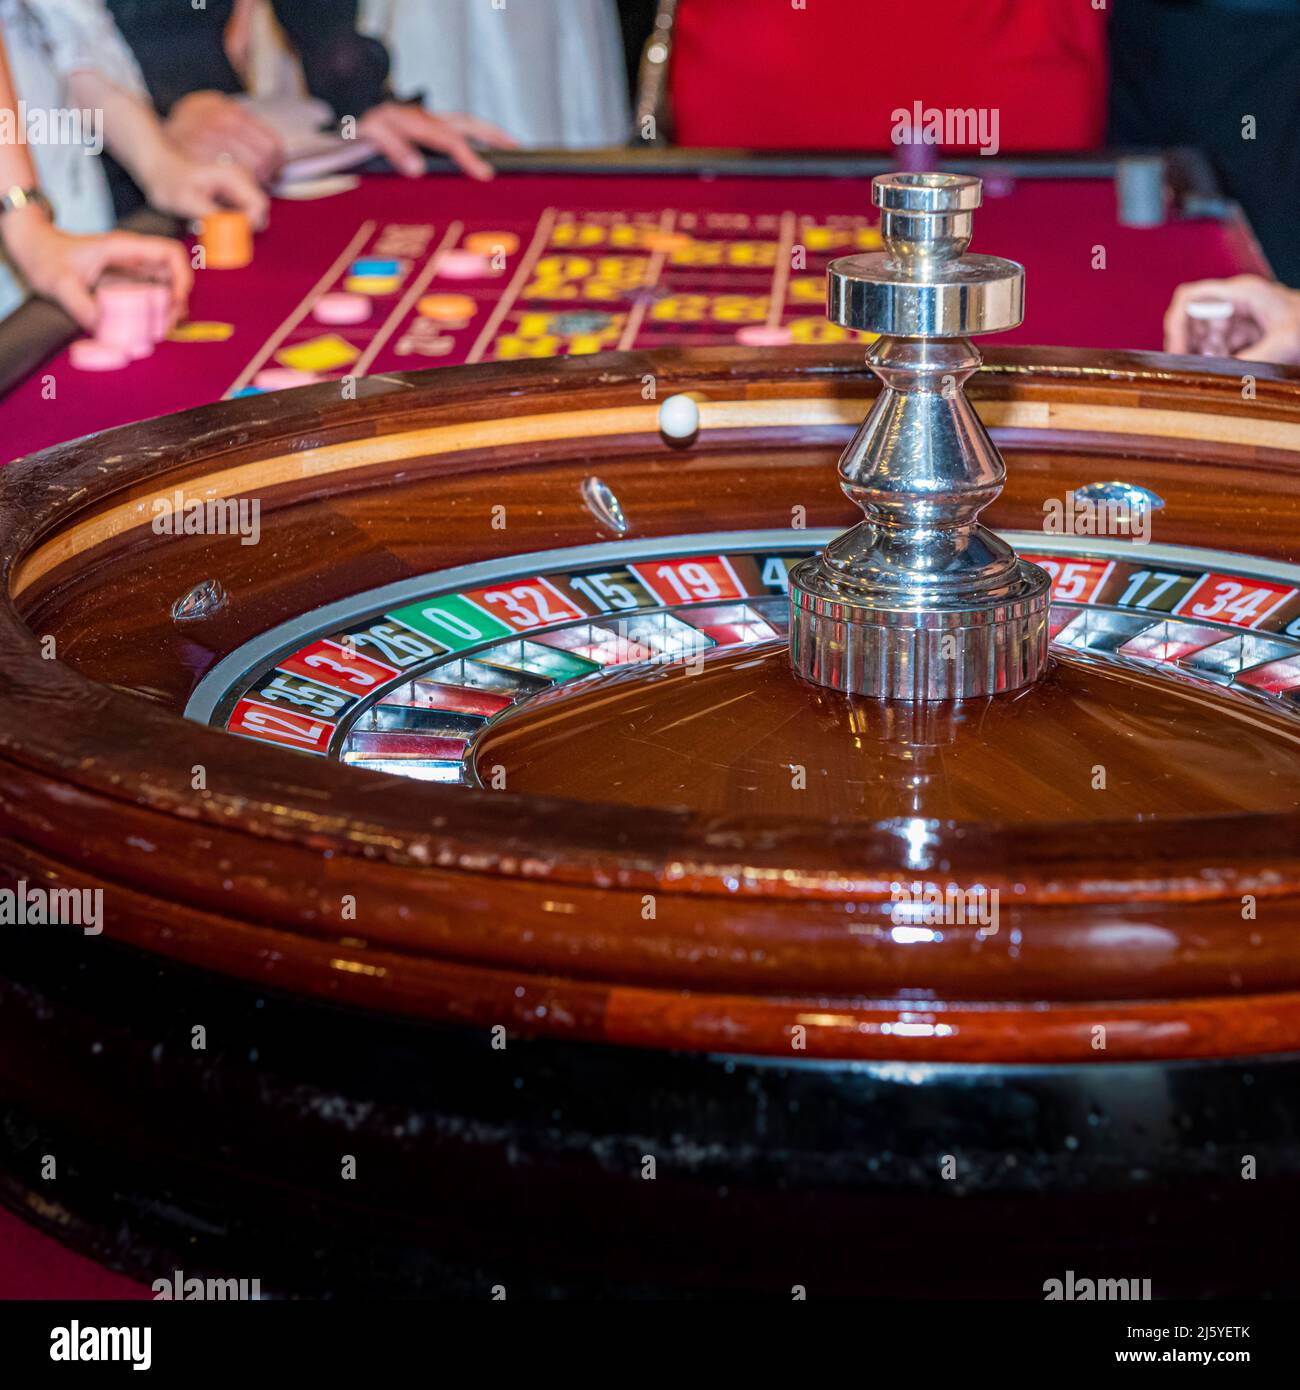 Roulette wheel with red casino table in the distance. Stock Photo